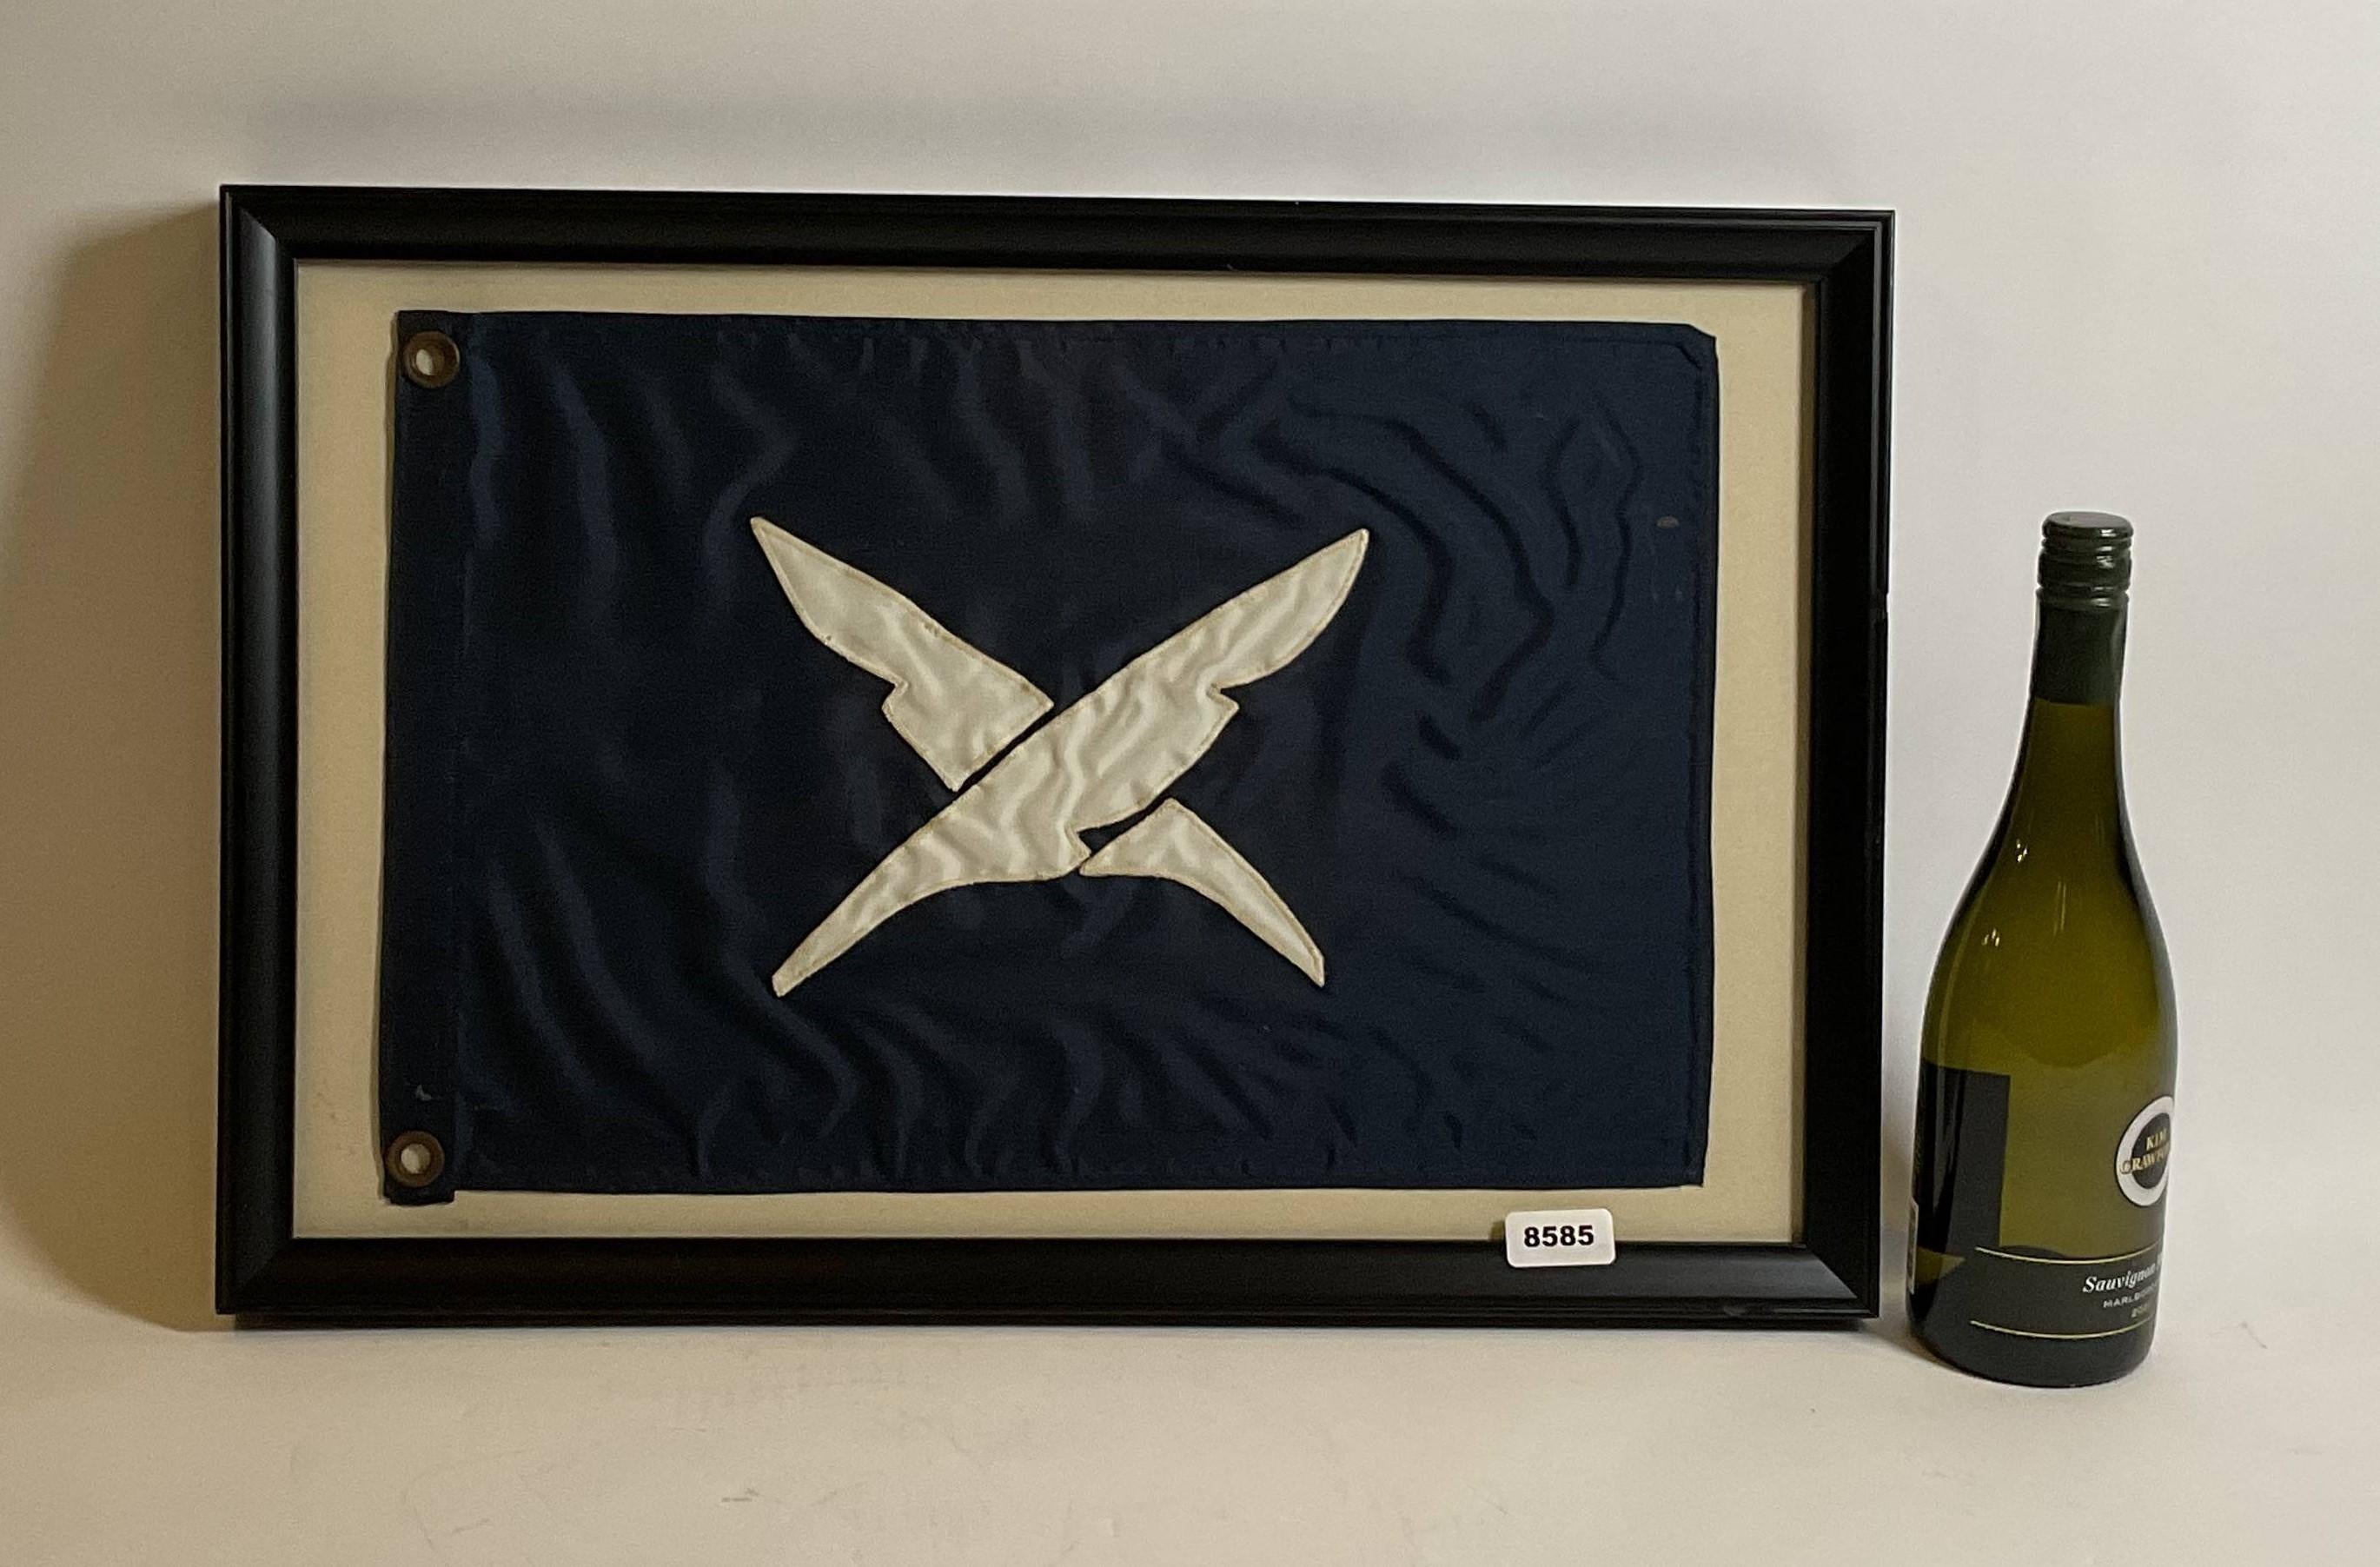 Nautical flag in frame with glass. Blue flag with crossed feathered quills. Blue field with white applied letters. White hoist with brass grommets.

Weight: 4 lbs.
Overall Dimensions: 15